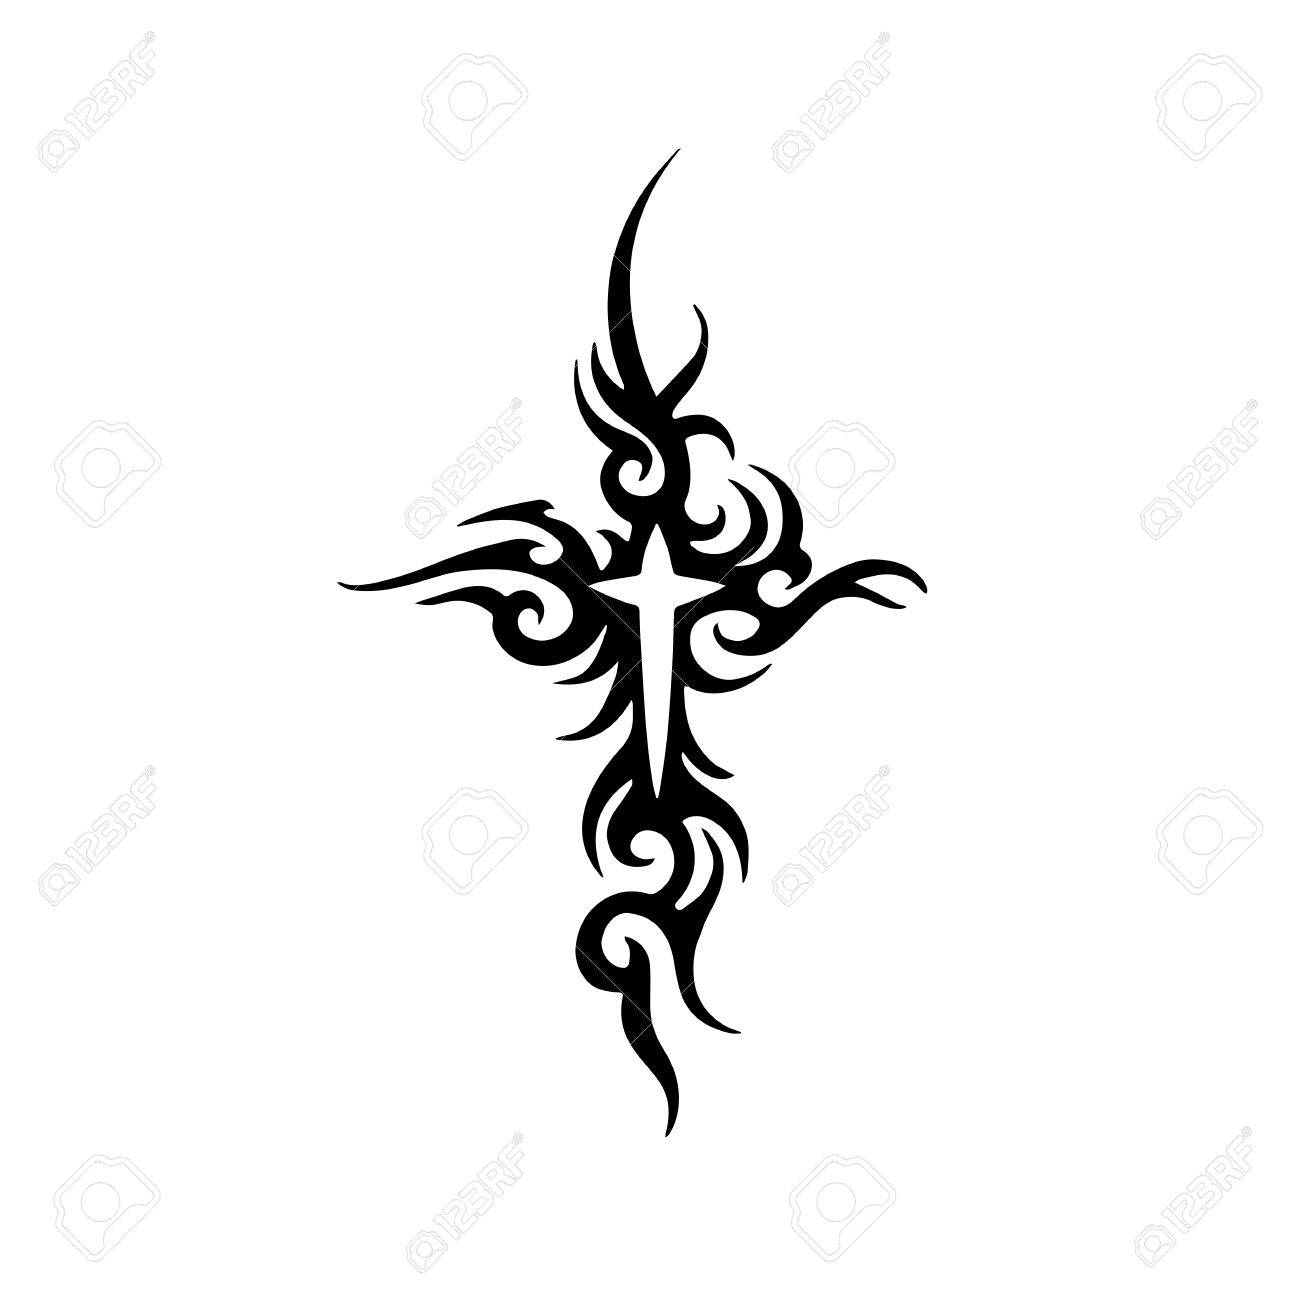 Tribal Cross Tattoo Design Royalty Free Cliparts Vectors And Stock for sizing 1300 X 1300